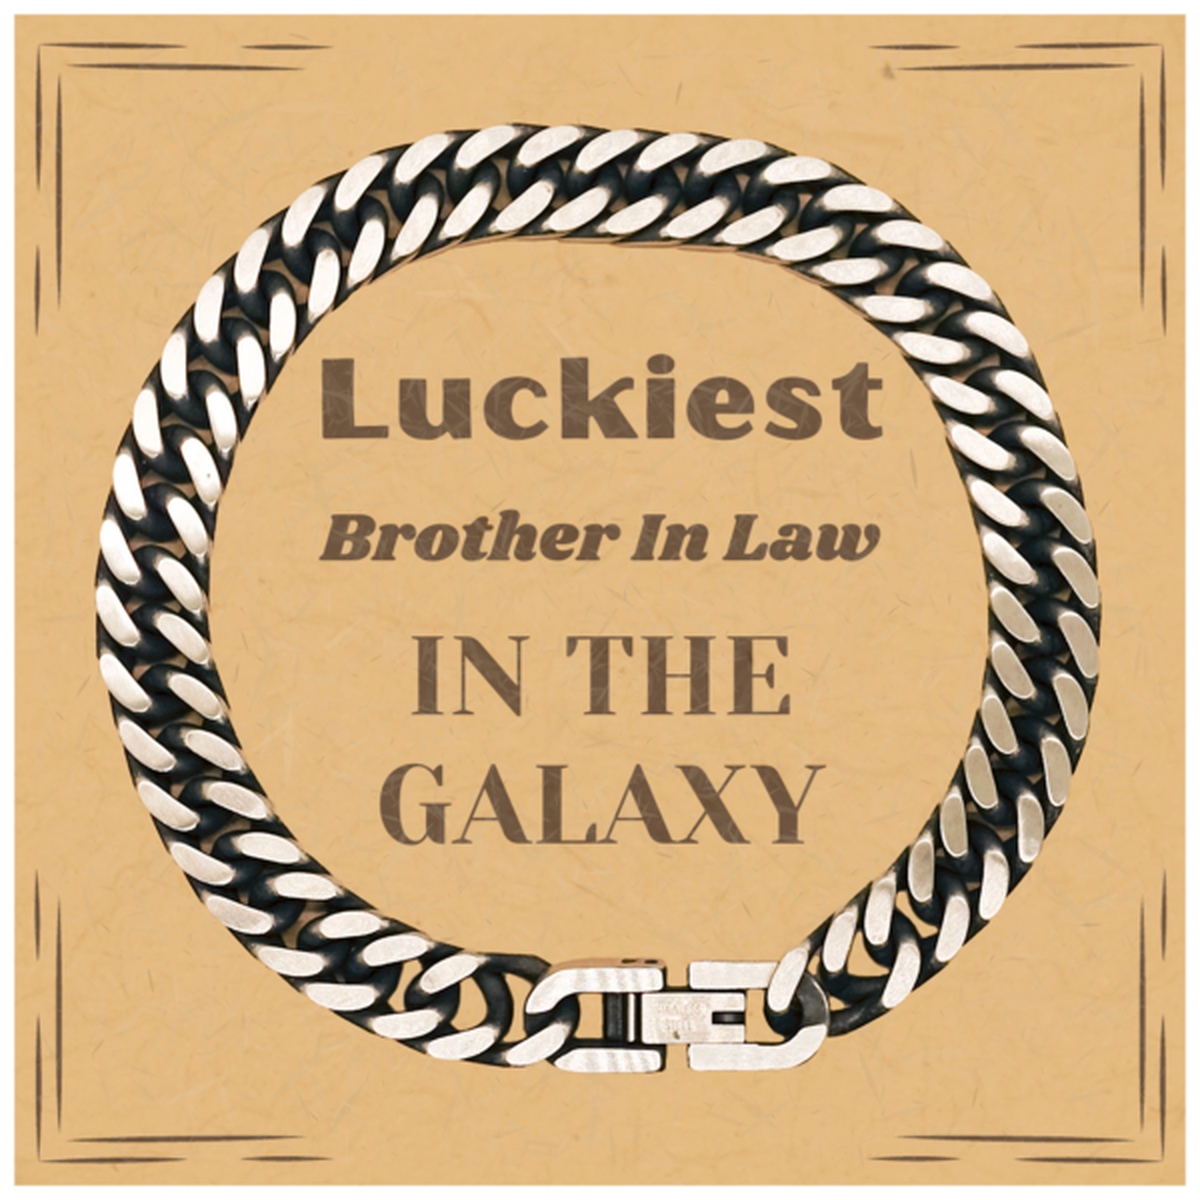 Luckiest Brother In Law in the Galaxy, To My Brother In Law Message Card Gifts, Christmas Brother In Law Cuban Link Chain Bracelet Gifts, X-mas Birthday Unique Gifts For Brother In Law Men Women